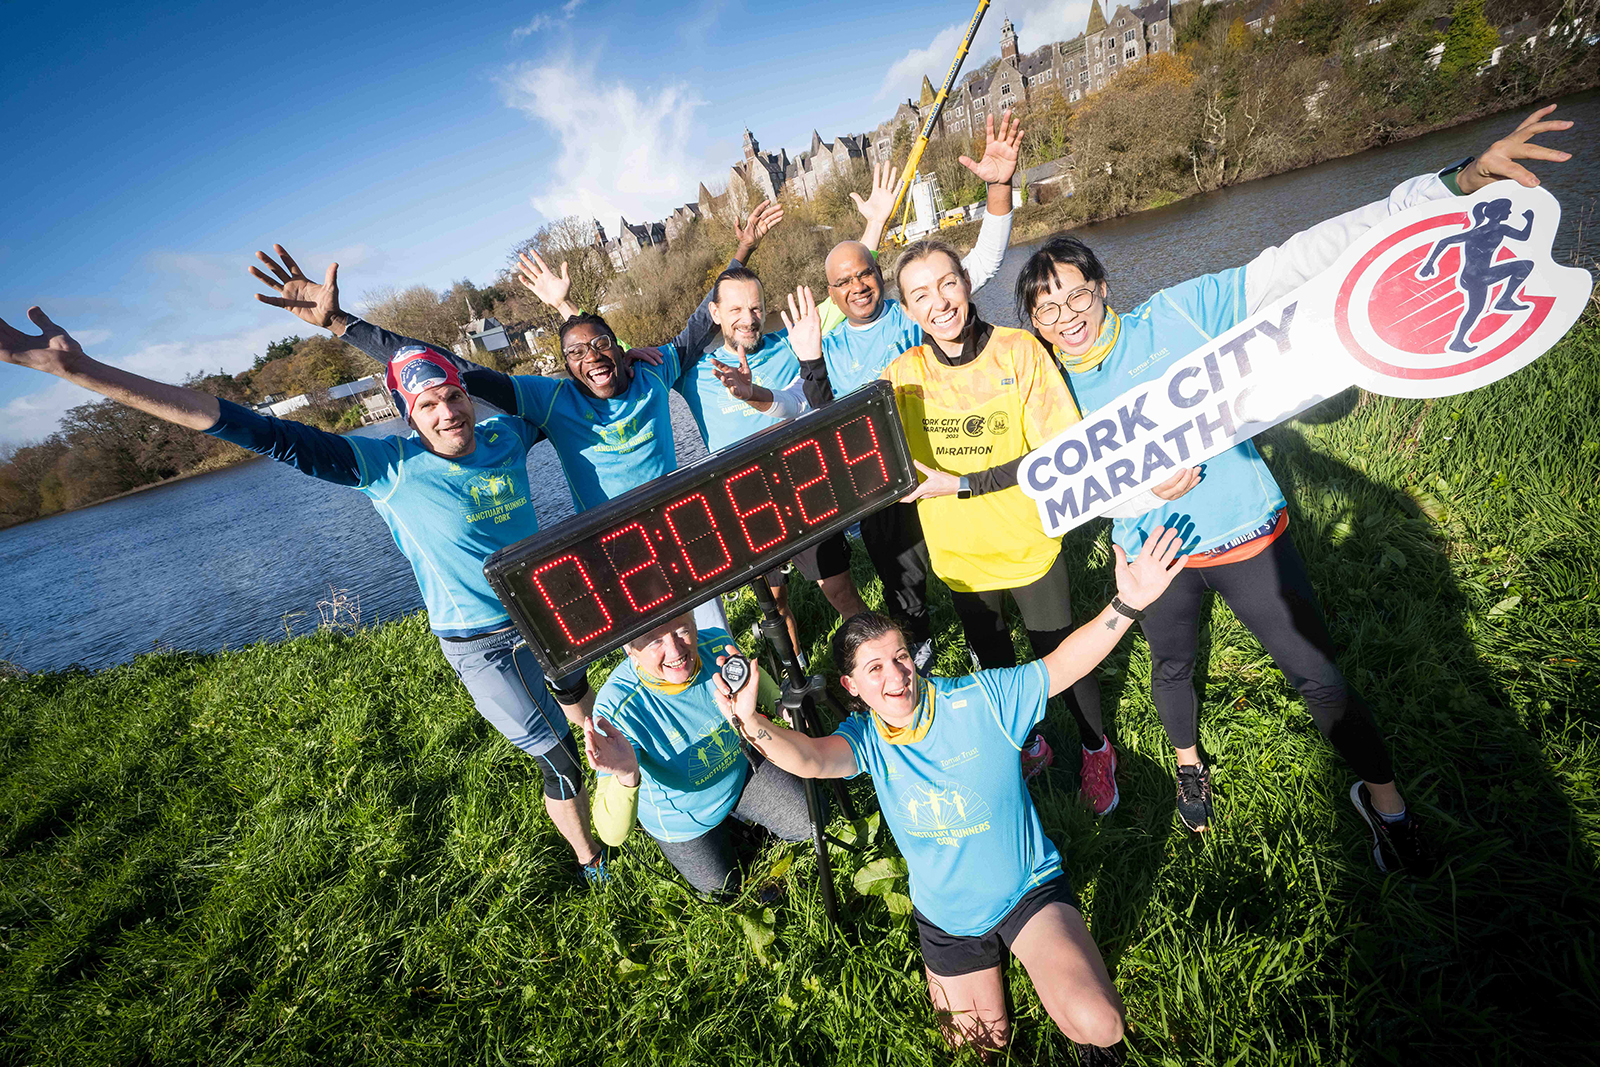 Cork City Marathon on course for sell-out